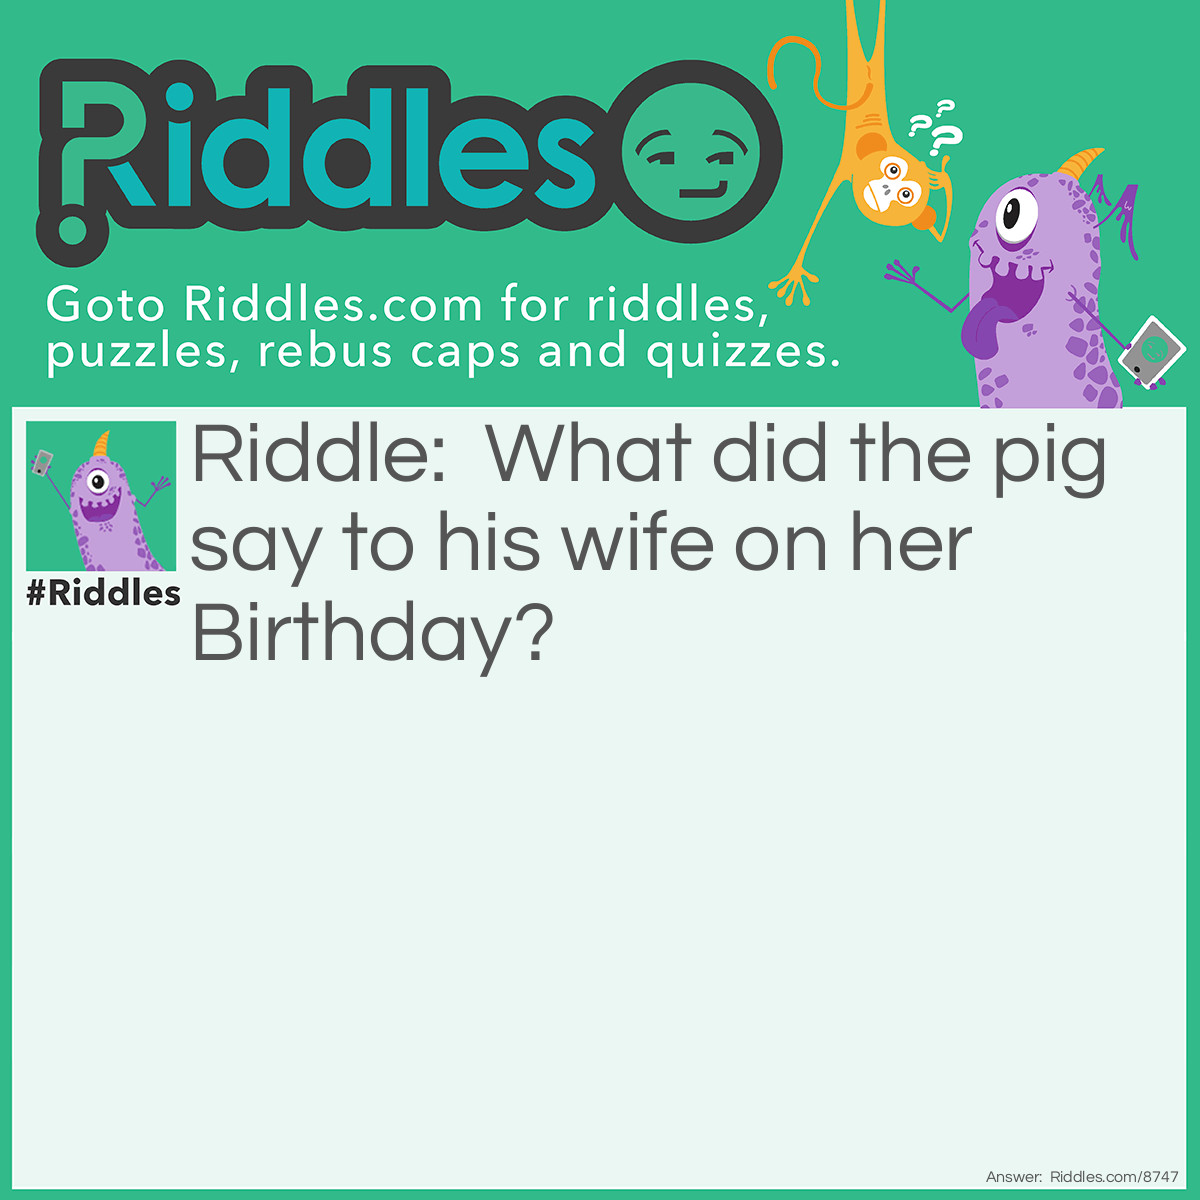 Riddle: What did the pig say to his wife on her Birthday? Answer: Onk! Onk! It is your birthday today.